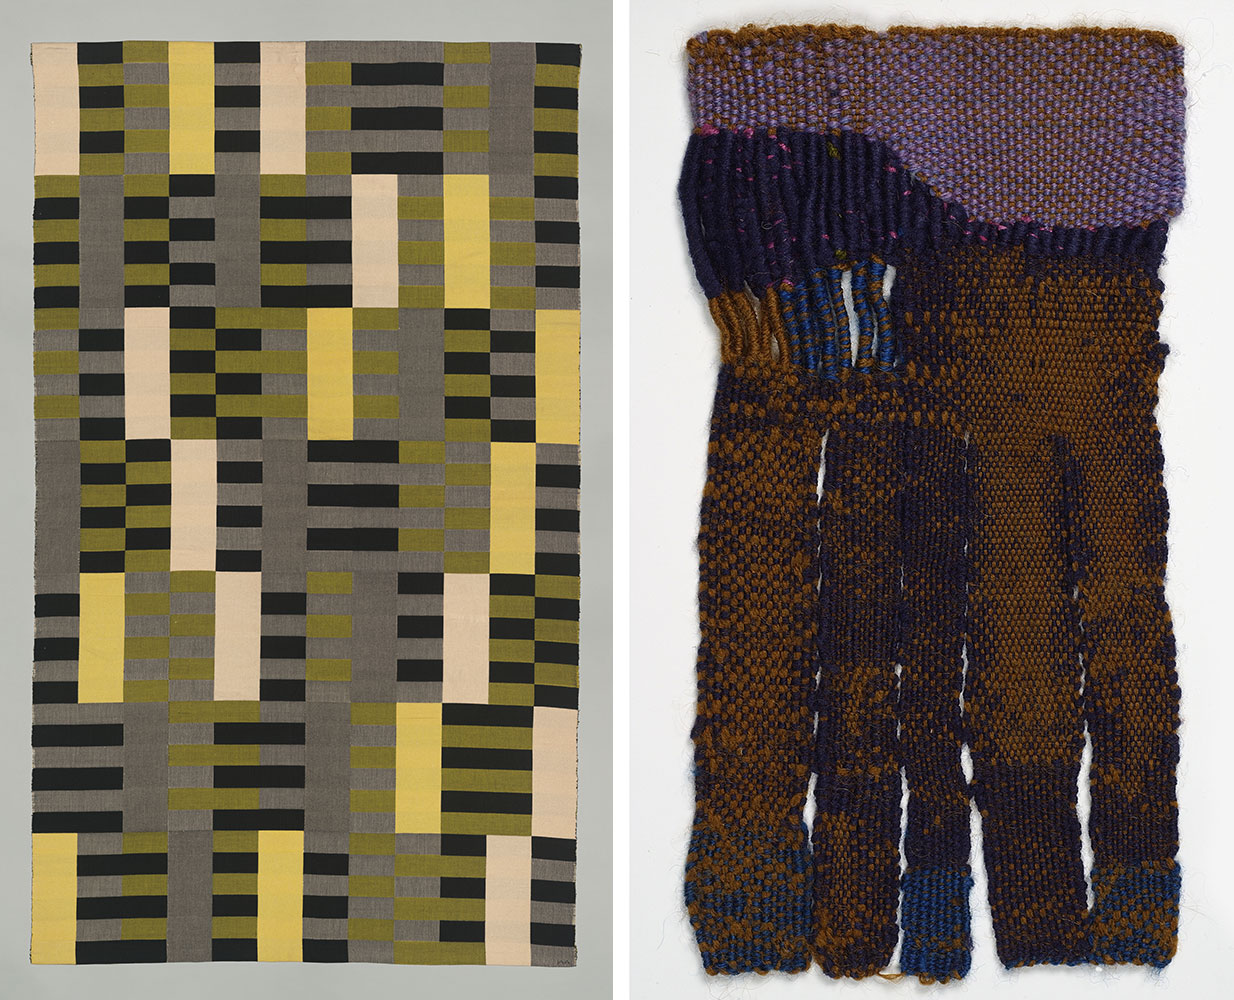 Left: Anni Albers, Orange, Connecticut Black-White-Yellow, Original 1926 (lost), re-woven by Gunta Stölzl in 1965, Mercerized cotton, silk, 80 1/4 × 47 3/8 in. (203.8 × 120.3 cm), The Metropolitan Museum of Art, Purchase, Everfast Fabrics Inc. and Edward C. Moore Jr. Gift, 1969, (69.134), Image: © The Josef and Anni Albers Foundation / Artists Rights Society (ARS), New York, 2024, © The Metropolitan Museum of Art Hyla SkopitzRight: Sheila Hicks, Rallo, 1957, Wool, 9 1/2 × 5 1/8 inches (24.1 × 13 cm) Cooper Hewitt, Smithsonian Design Museum, Smithsonian Institution, Image: Matt Flynn © Smithsonian Institution 